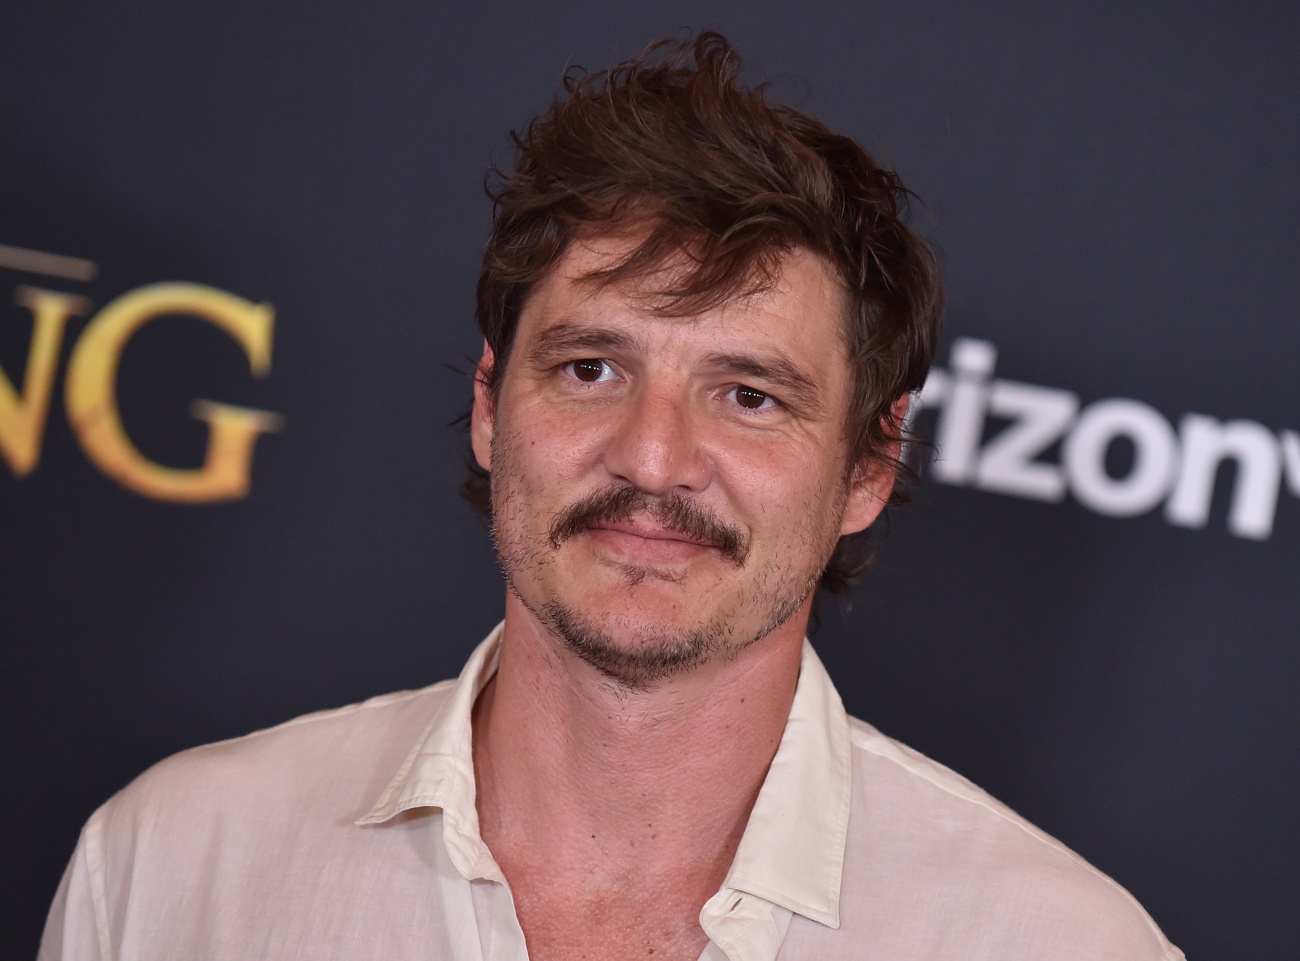 An unexpected anecdote of Pedro Pascal: he suffered eye infection after a fan reenacted a scene from ‘Game of Thrones’